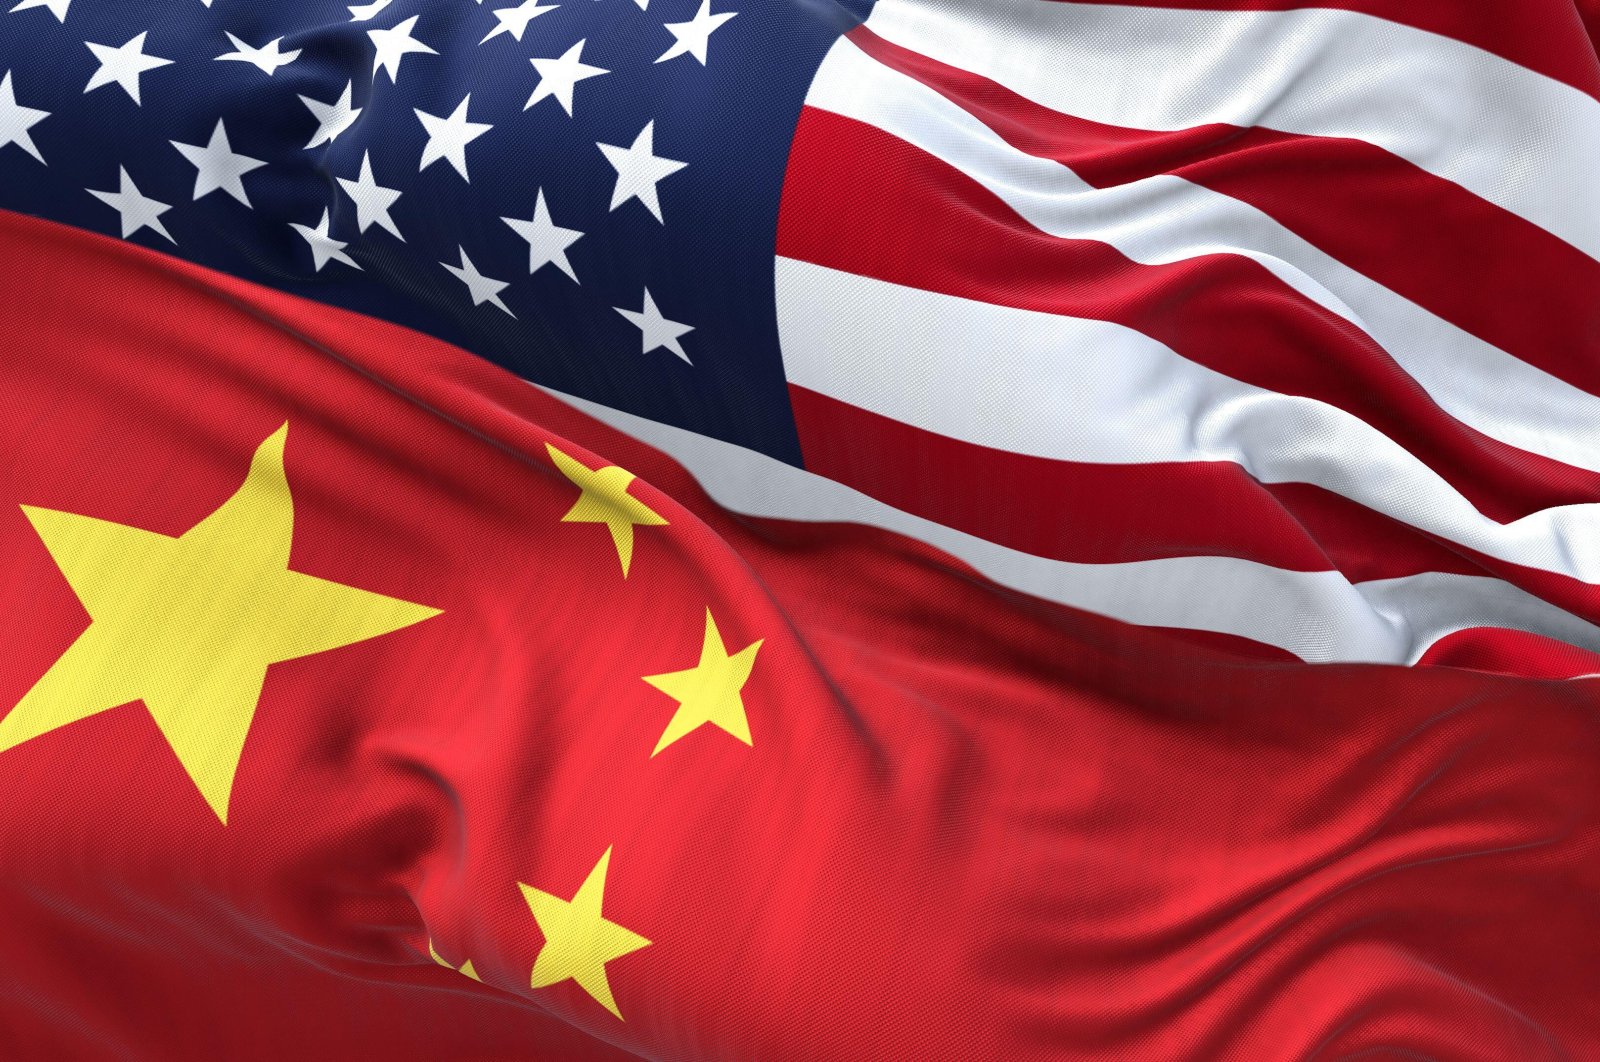 The U.S. and China are the two largest economies in the world, locked in fierce strategic competition.